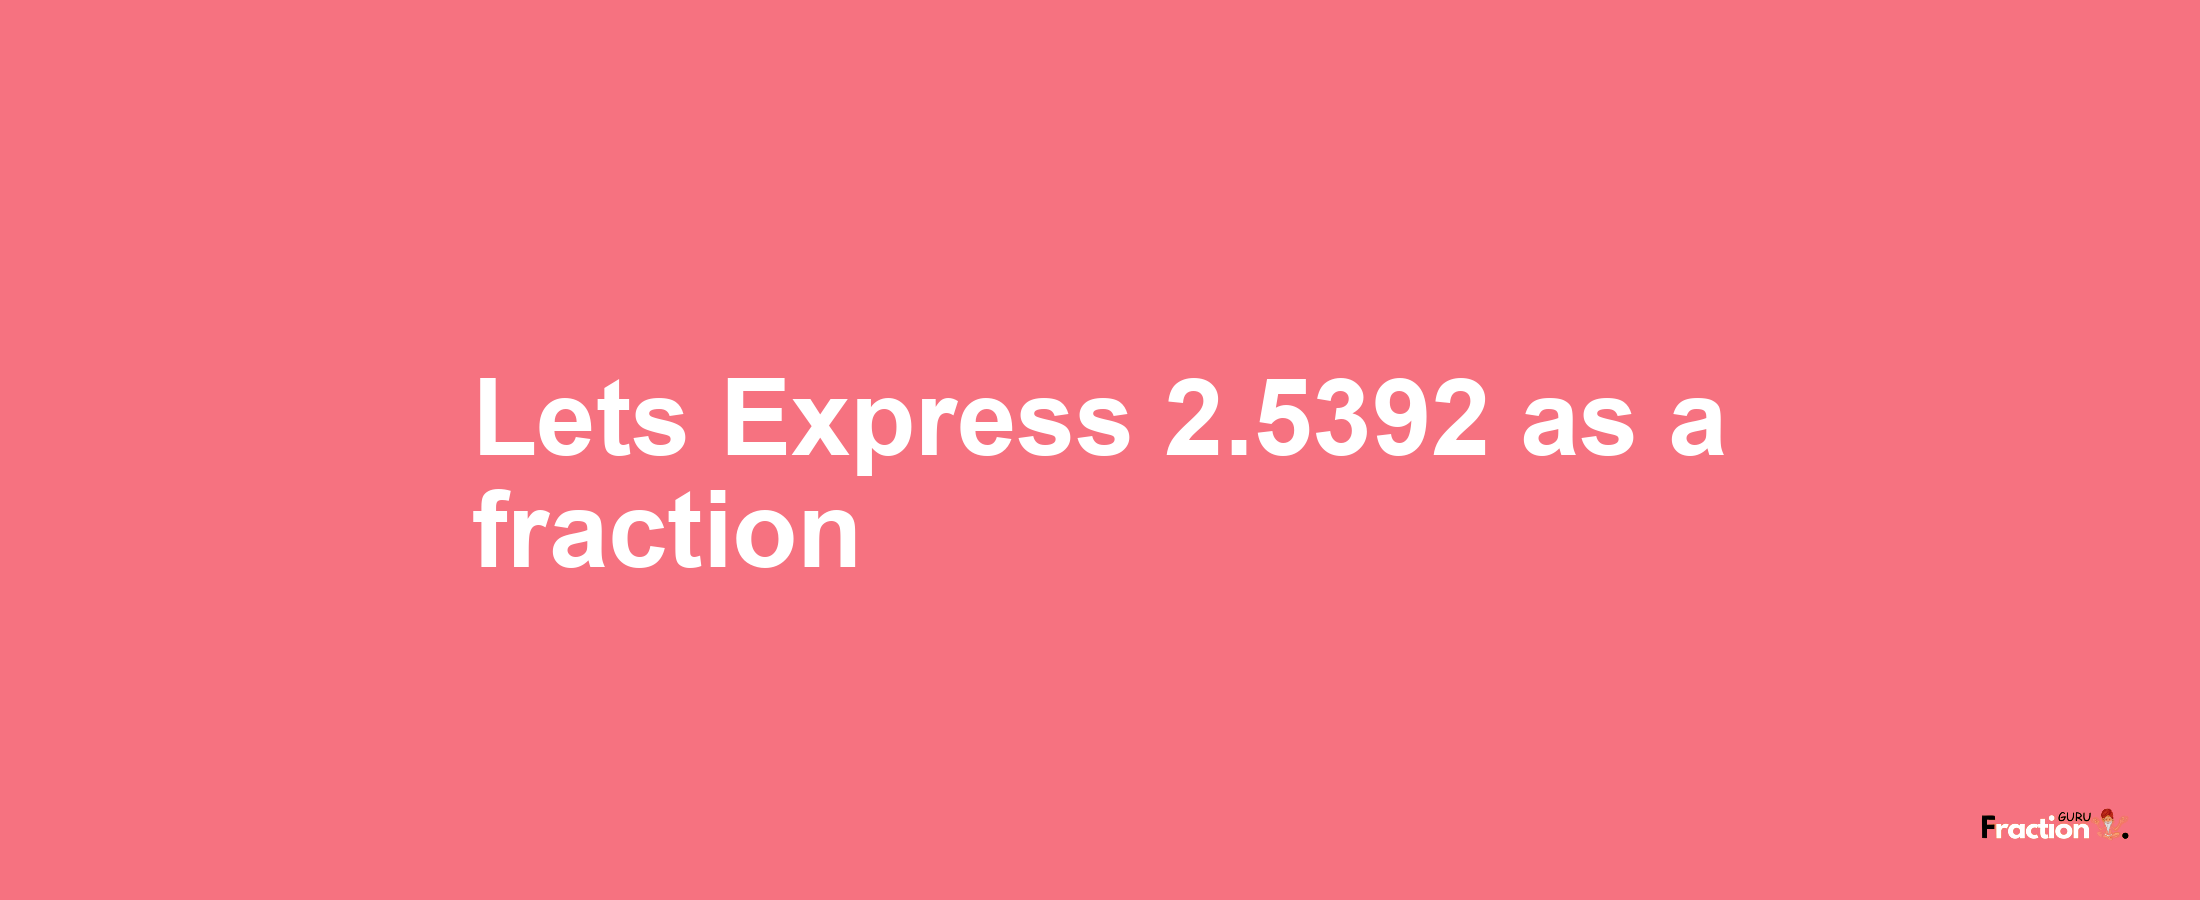 Lets Express 2.5392 as afraction